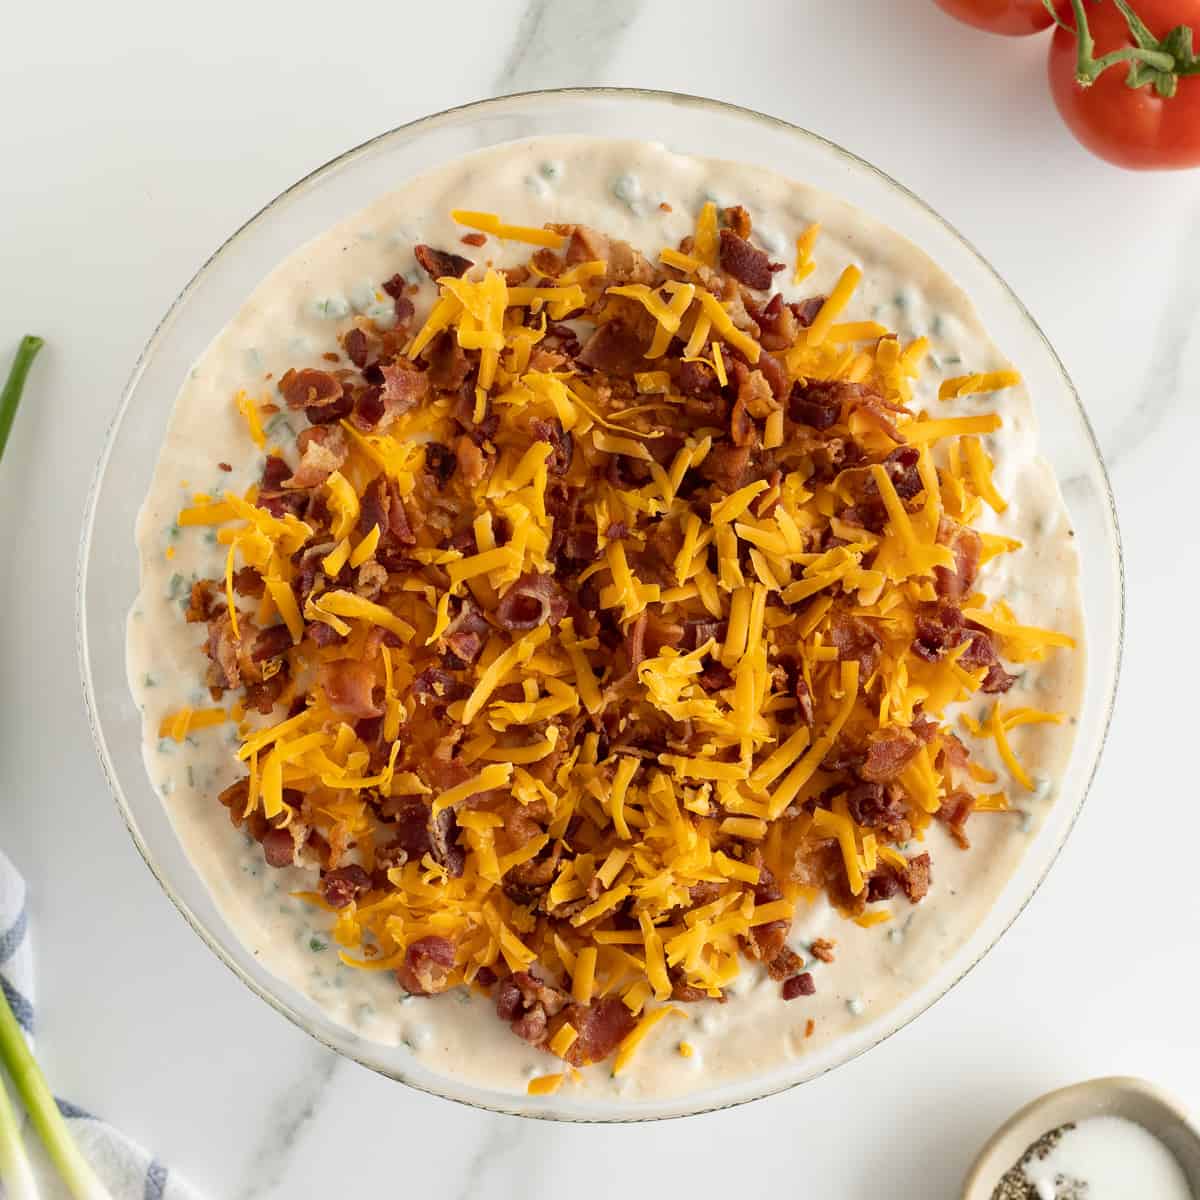 A garnish of shredded cheddar cheese and crumbled bacon on top of a seven layer salad in a glass bowl.